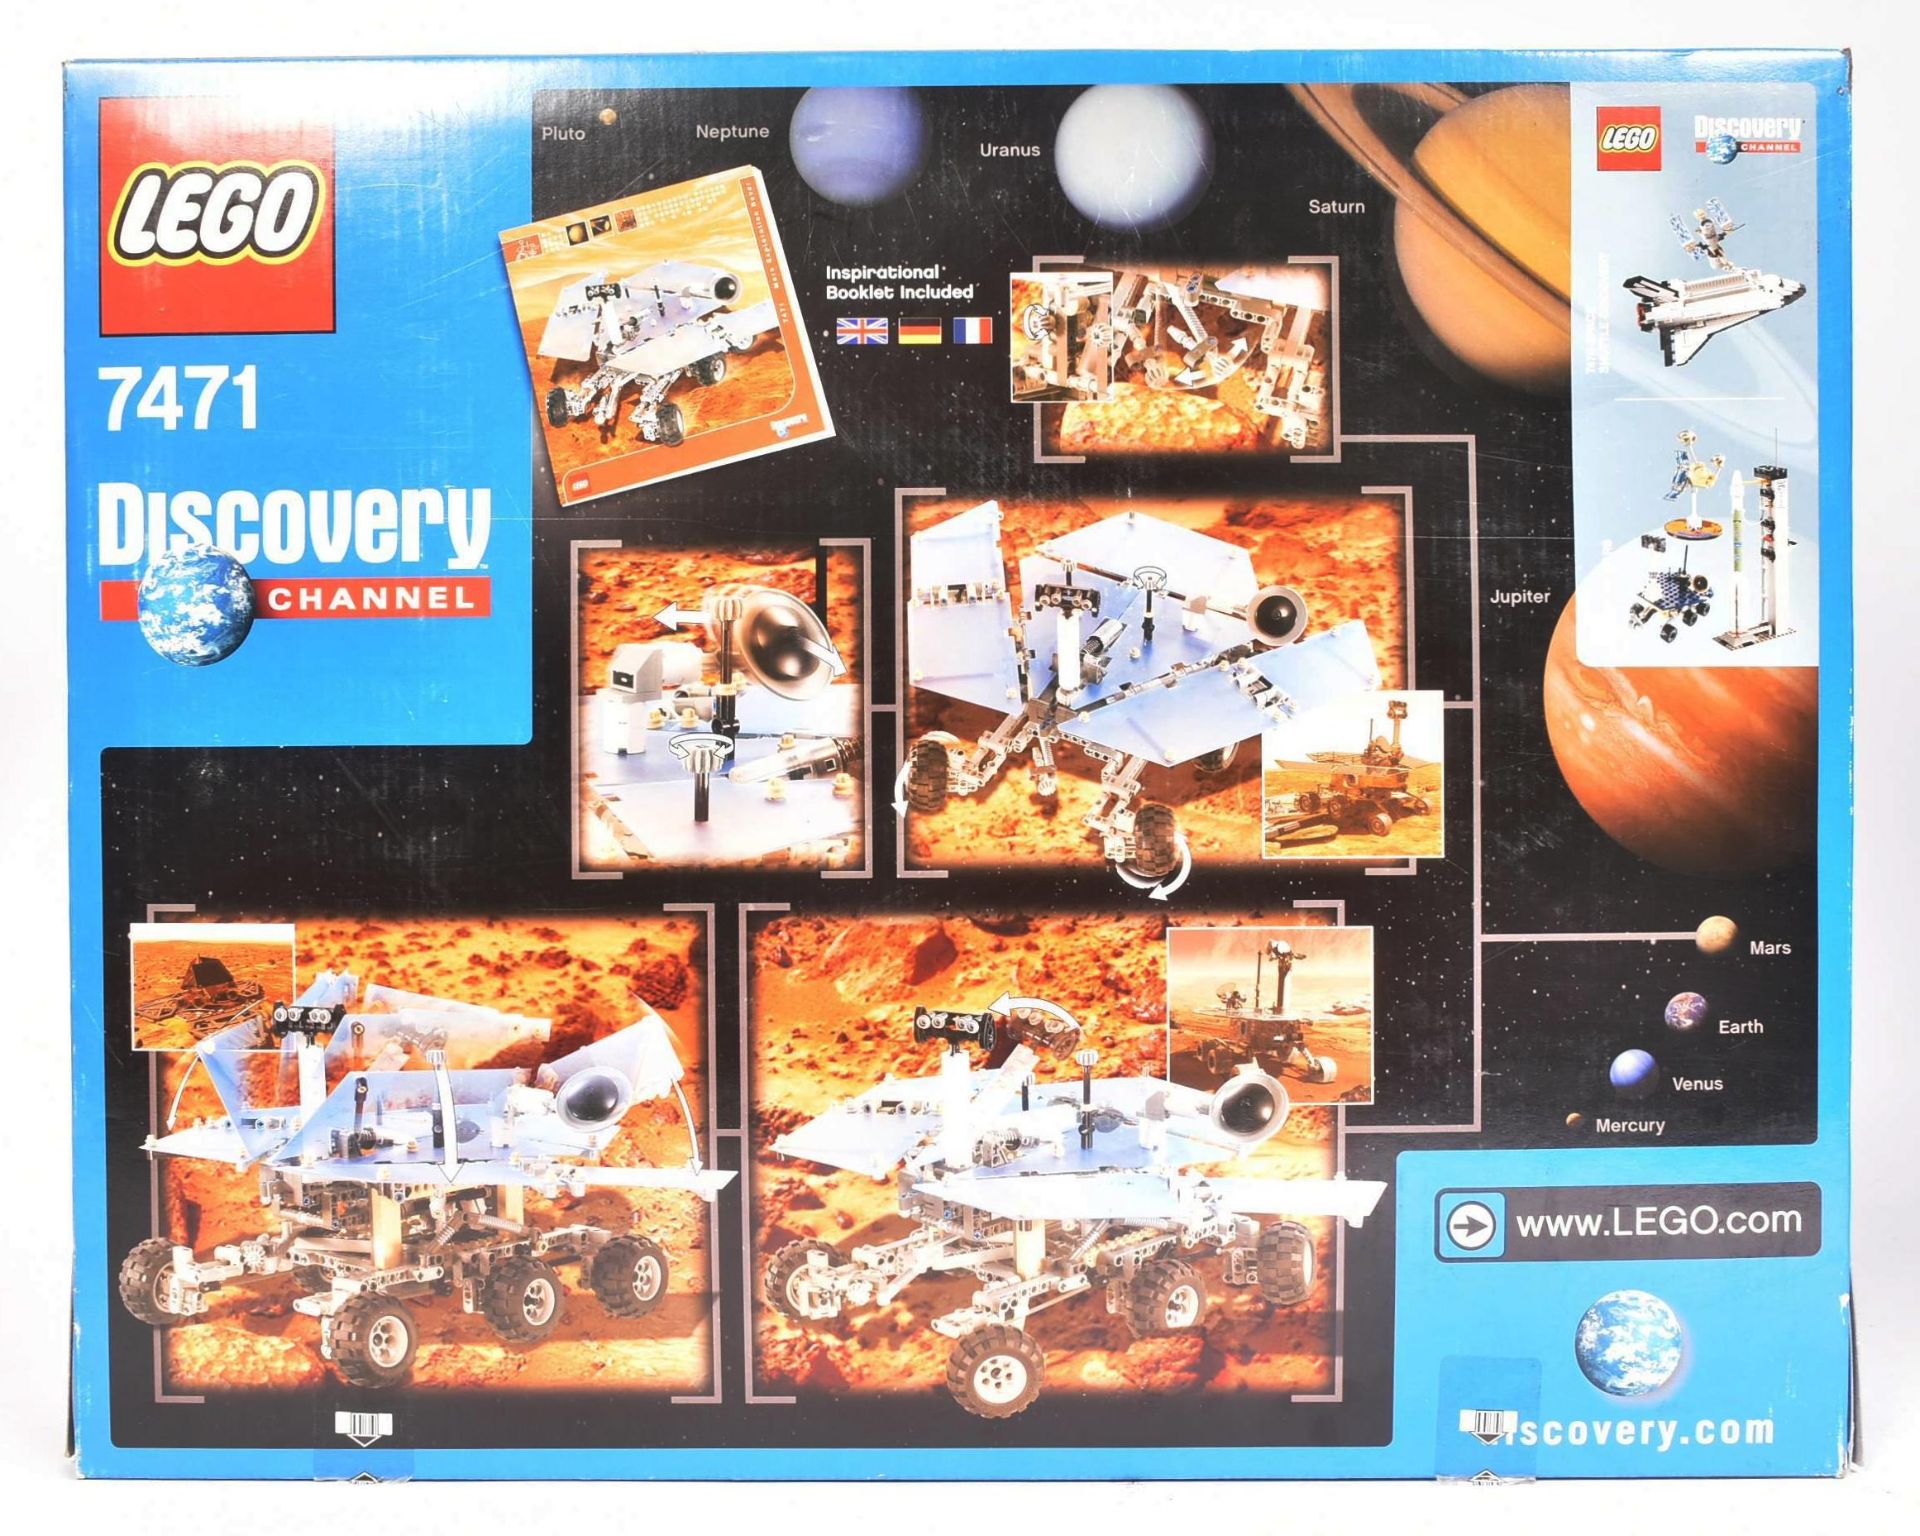 LEGO - COLLECTION OF LEGO DISCOVERY CHANNEL SPACE SETS - Image 2 of 6